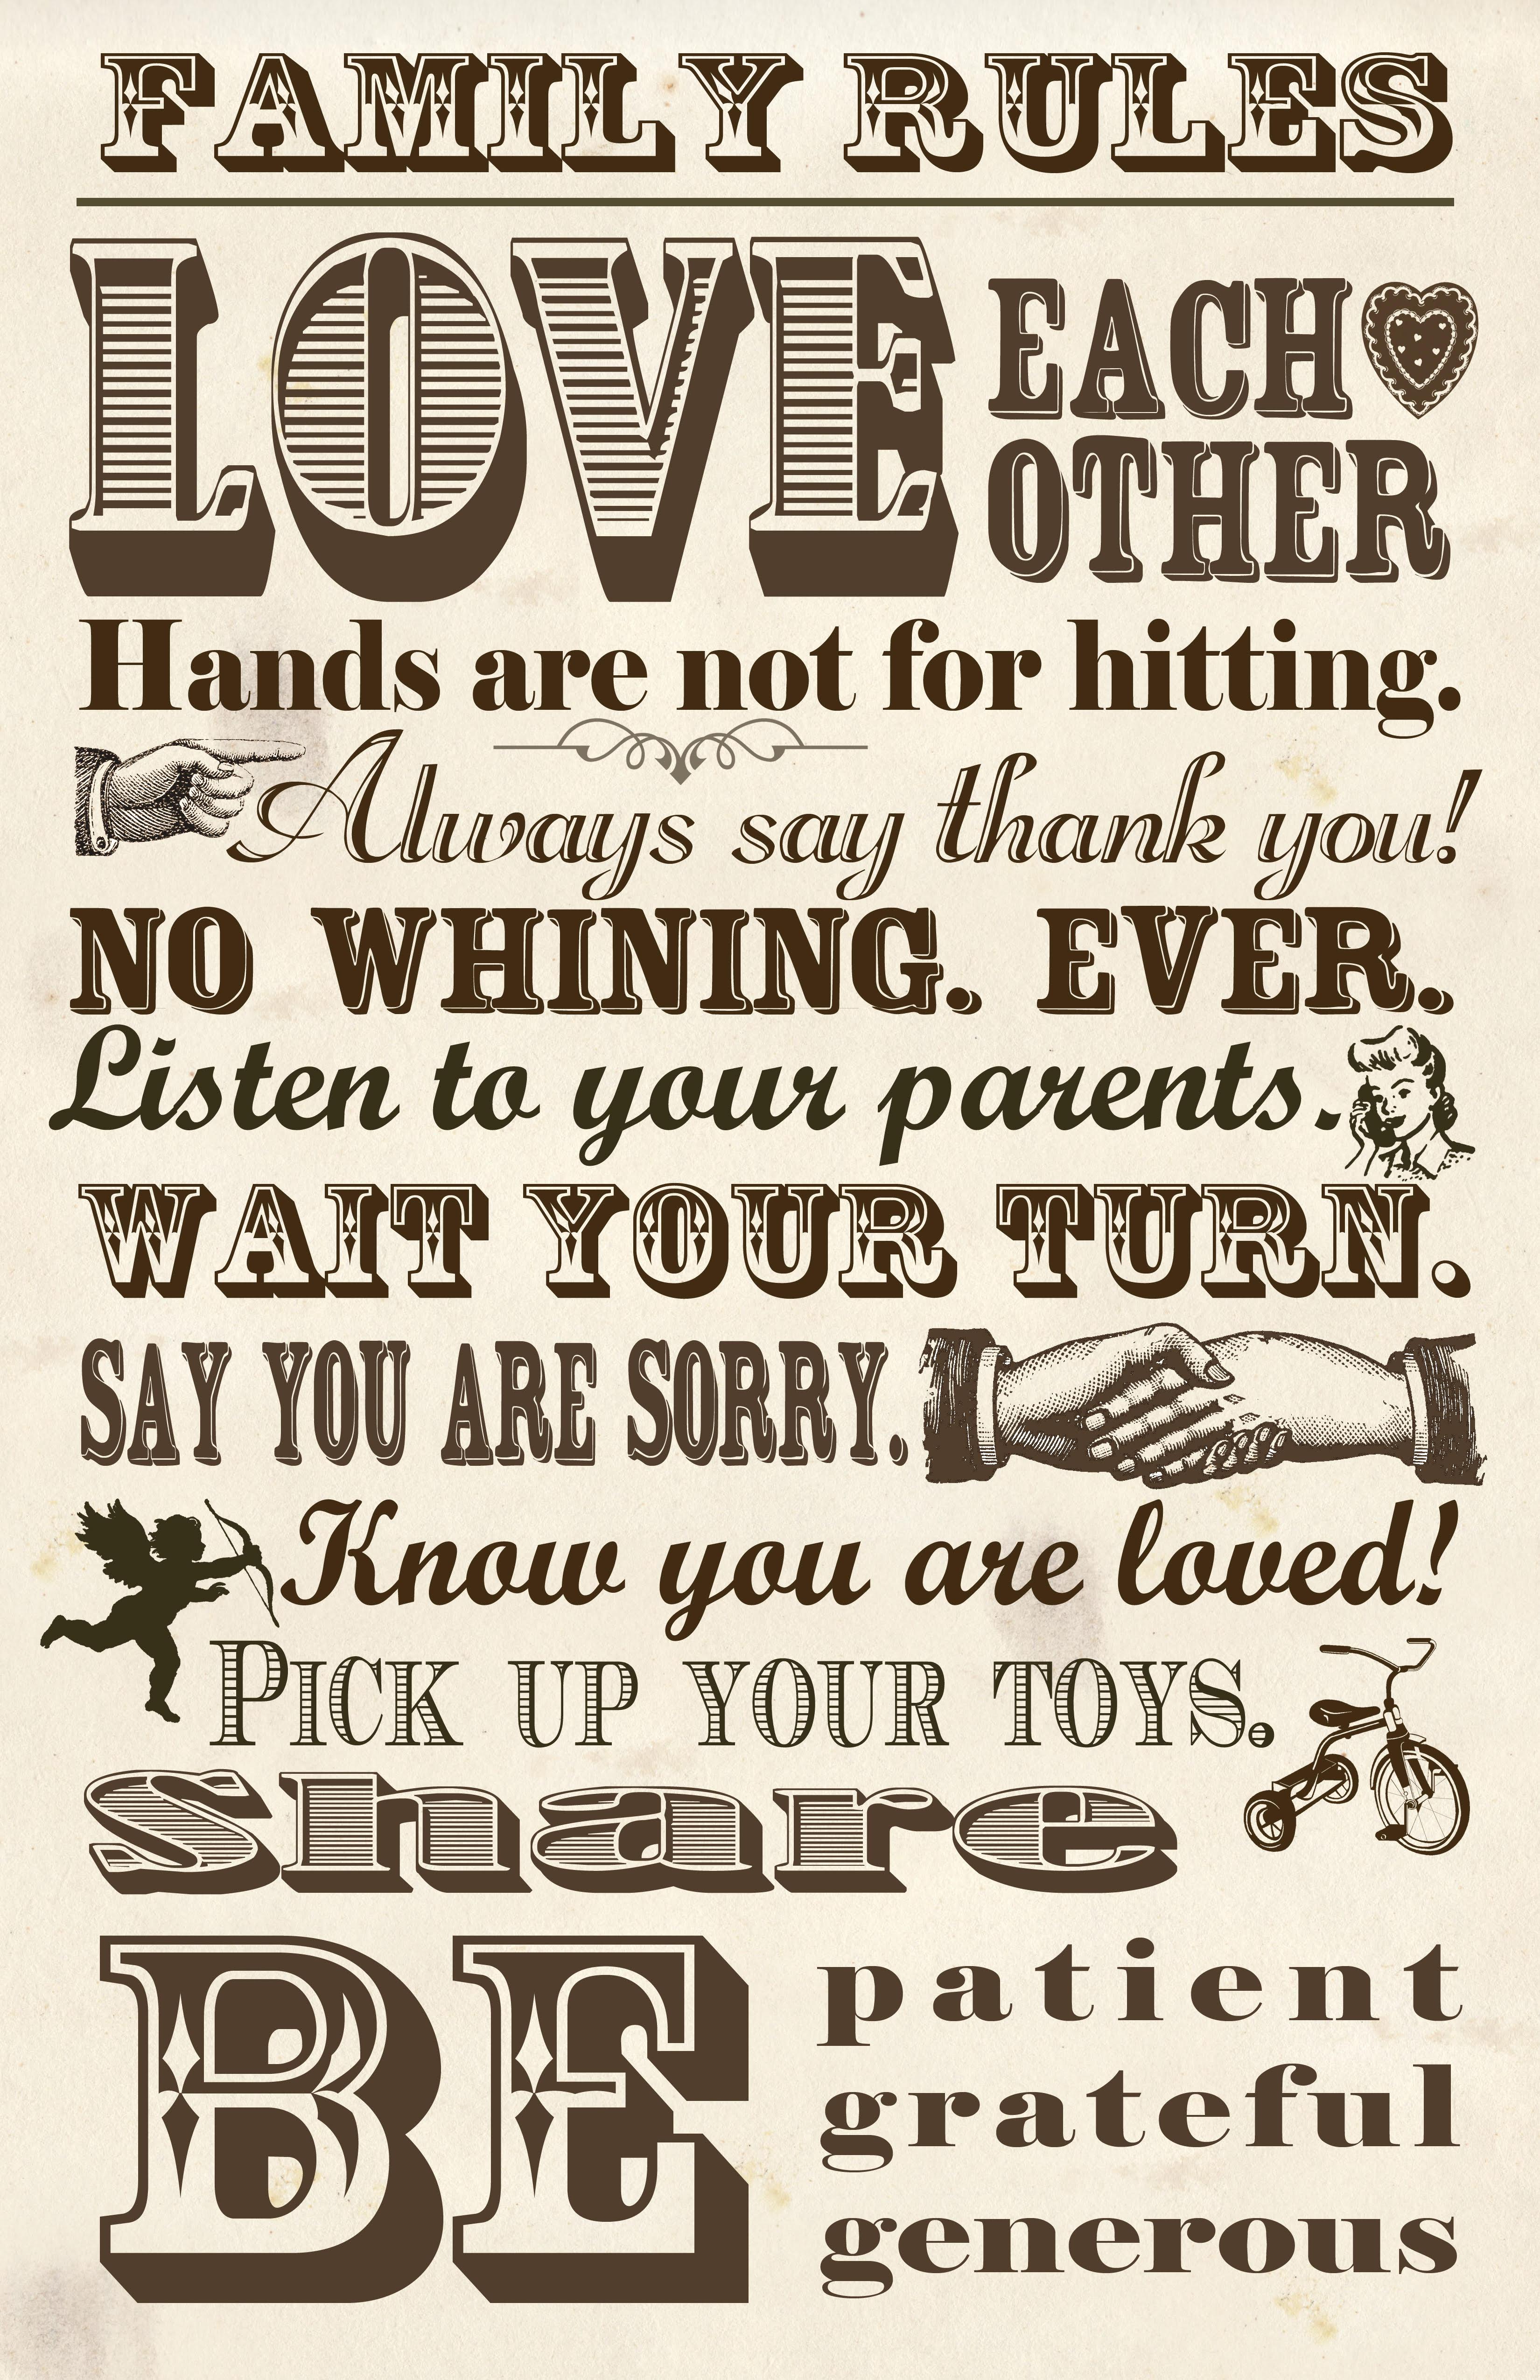 Family Rules: Love each other. Hands are not for hitting. Always say thank you! No whining. Ever. Listen to your parents. Wait your turn. Say you are sorry. Know you are loved! Pick up your toys. Share.  Be patient, grateful, generous.